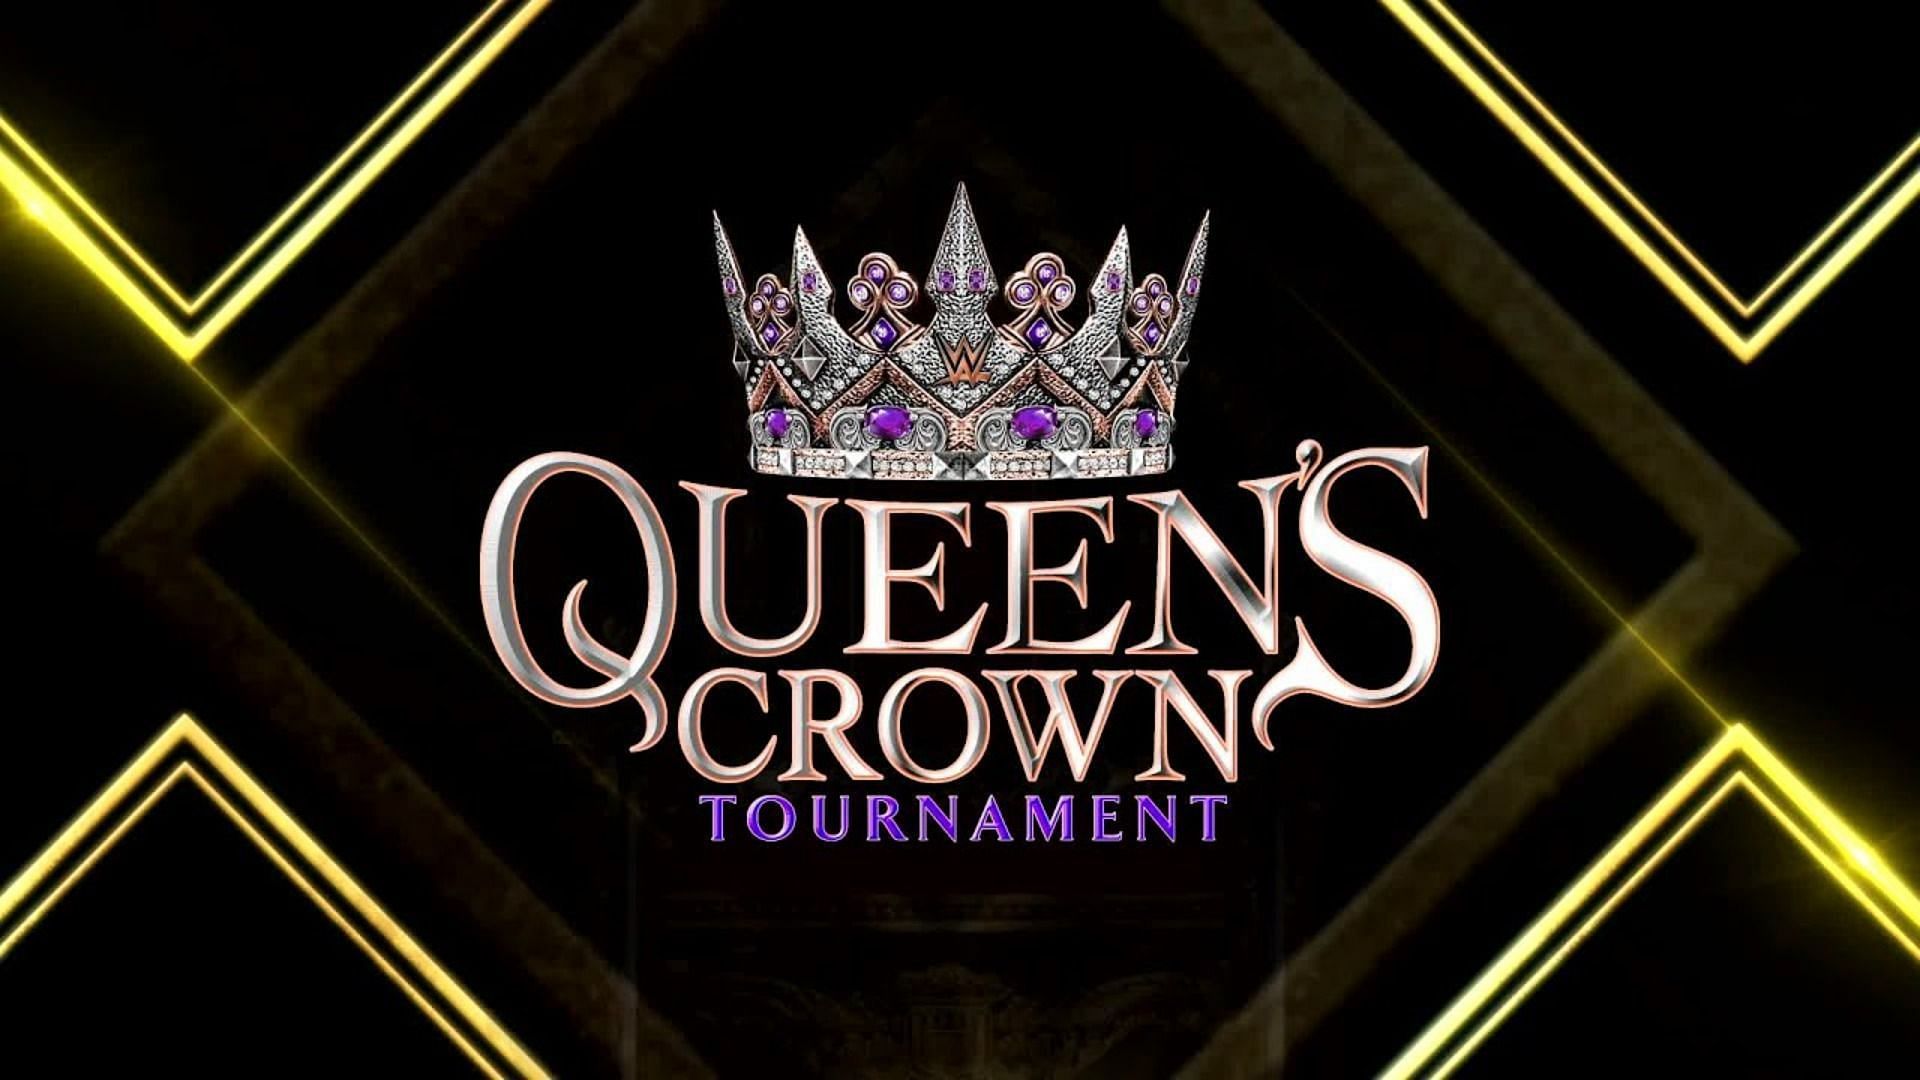 WWE When was the last WWE King and Queen of the Ring Tournament